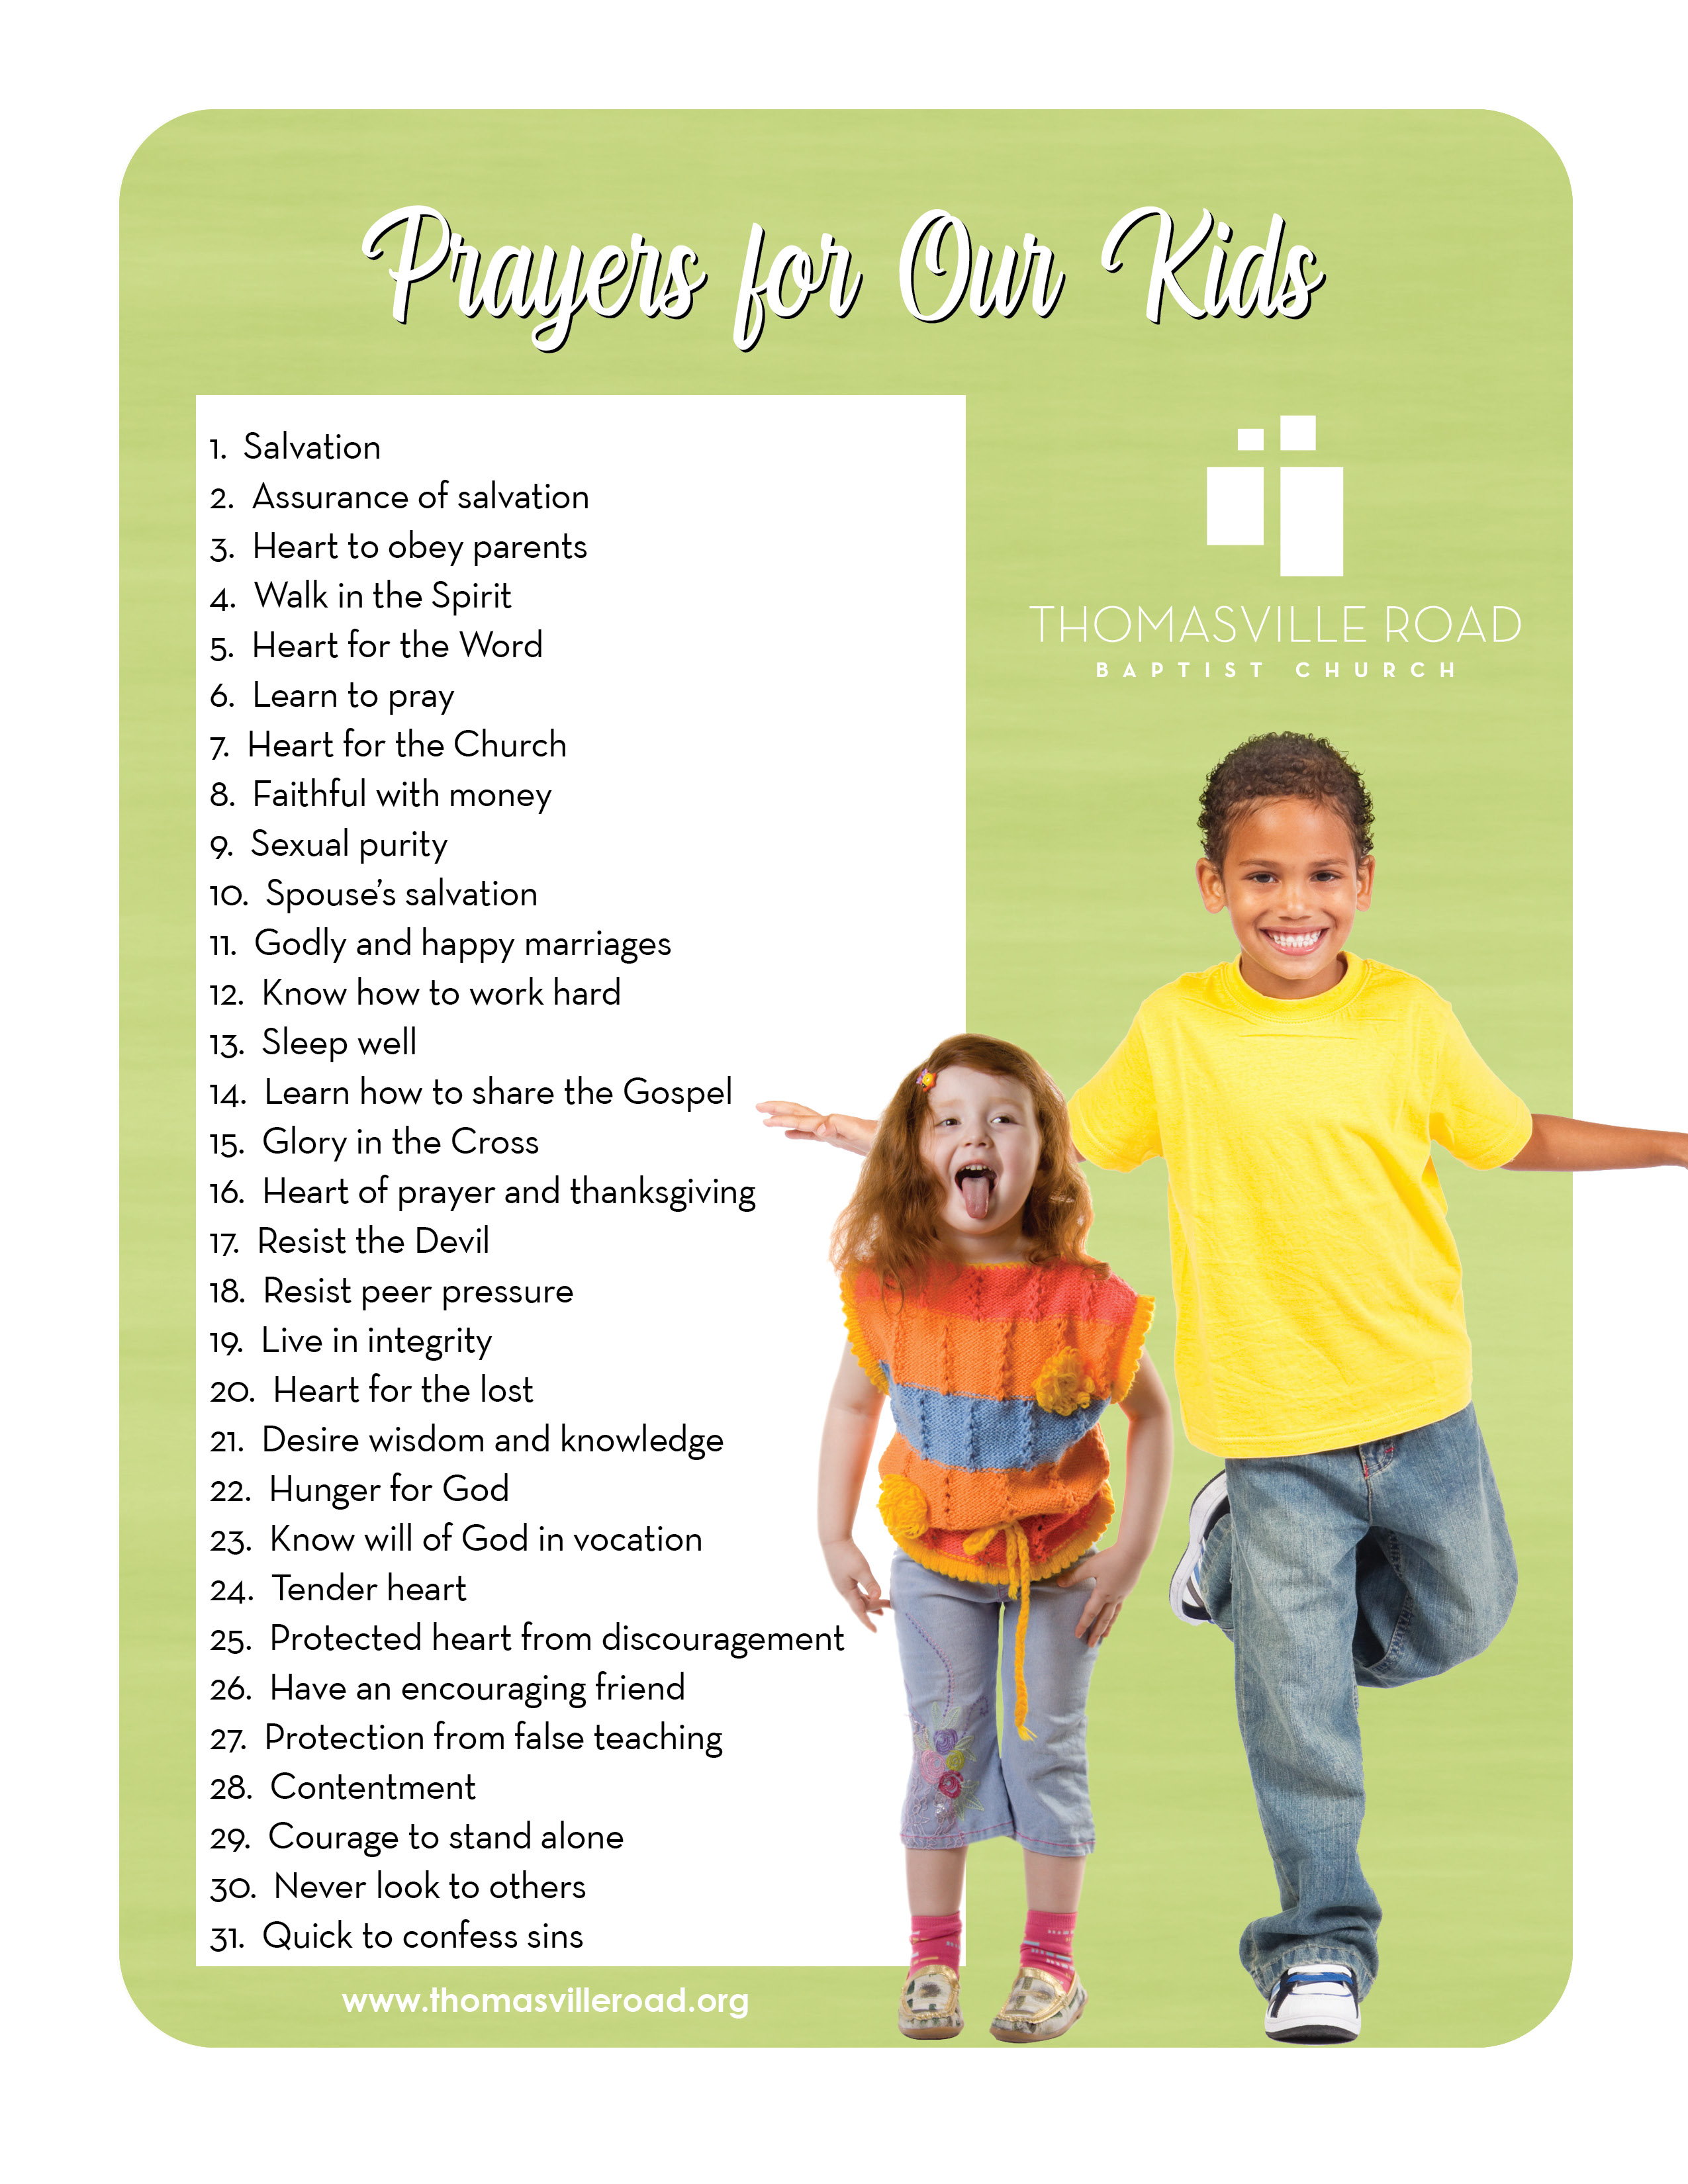 31 Ways to Pray for Our Kids Thomasville Road Baptist Church